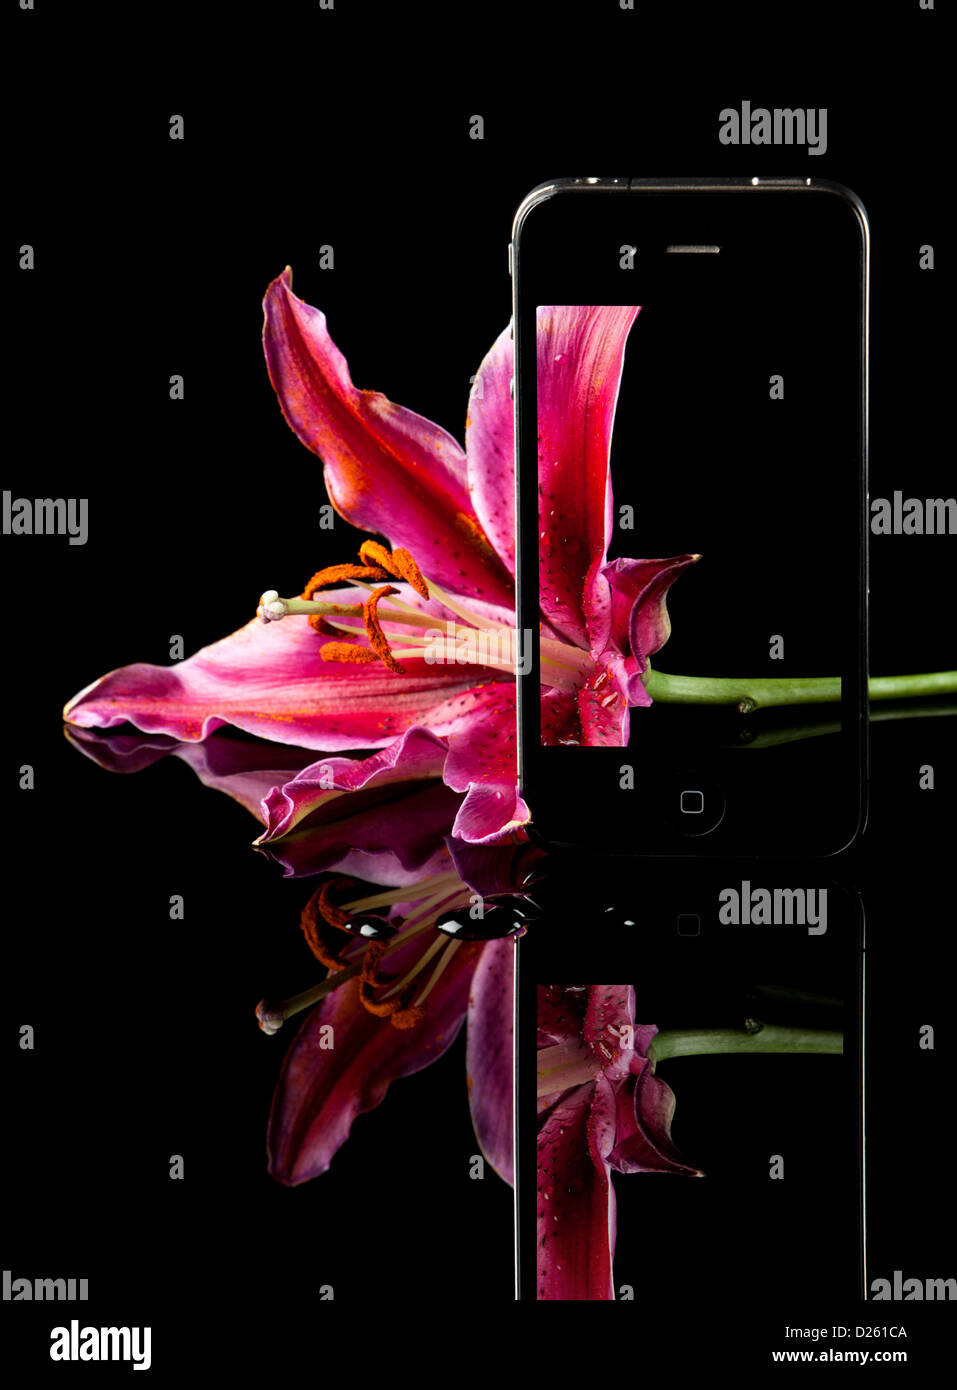 Purple lily flower on reflective black surface and its image on the retina display of an Apple iPhone 4 Stock Photo